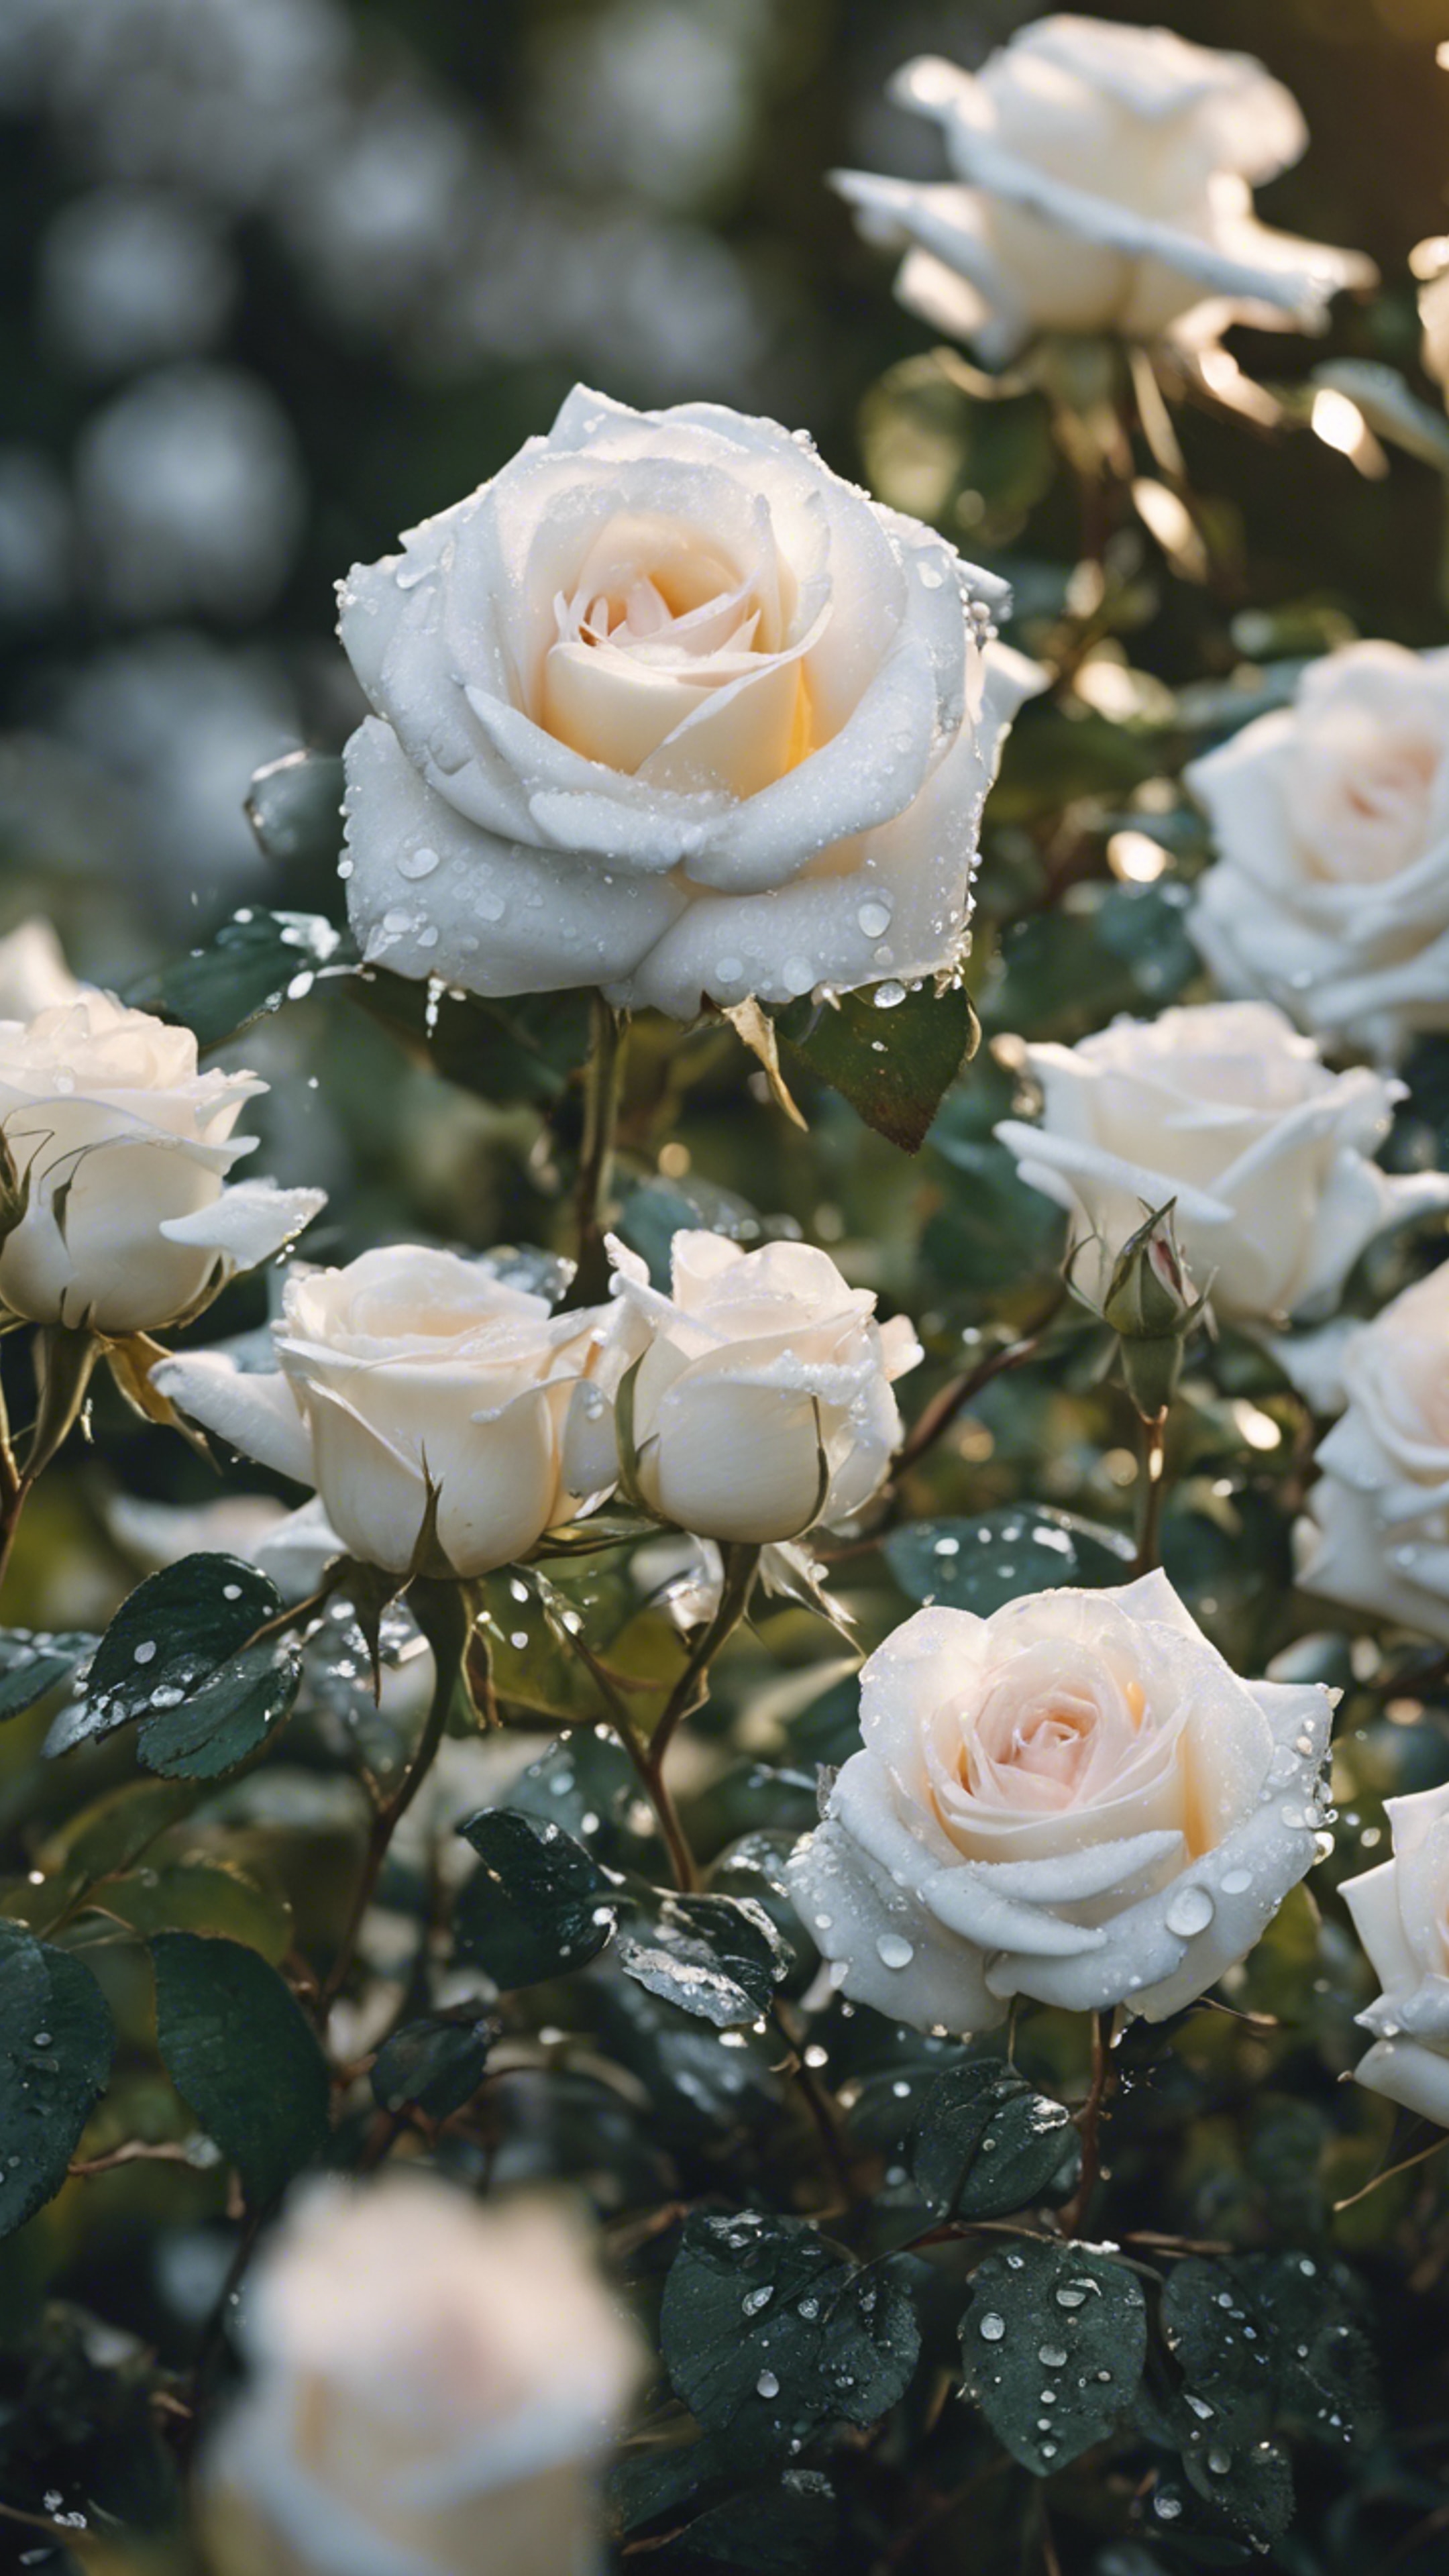 White roses covered in silver morning dew in a lush rose garden. Tapeta[67c2c5bc62874412a2b6]